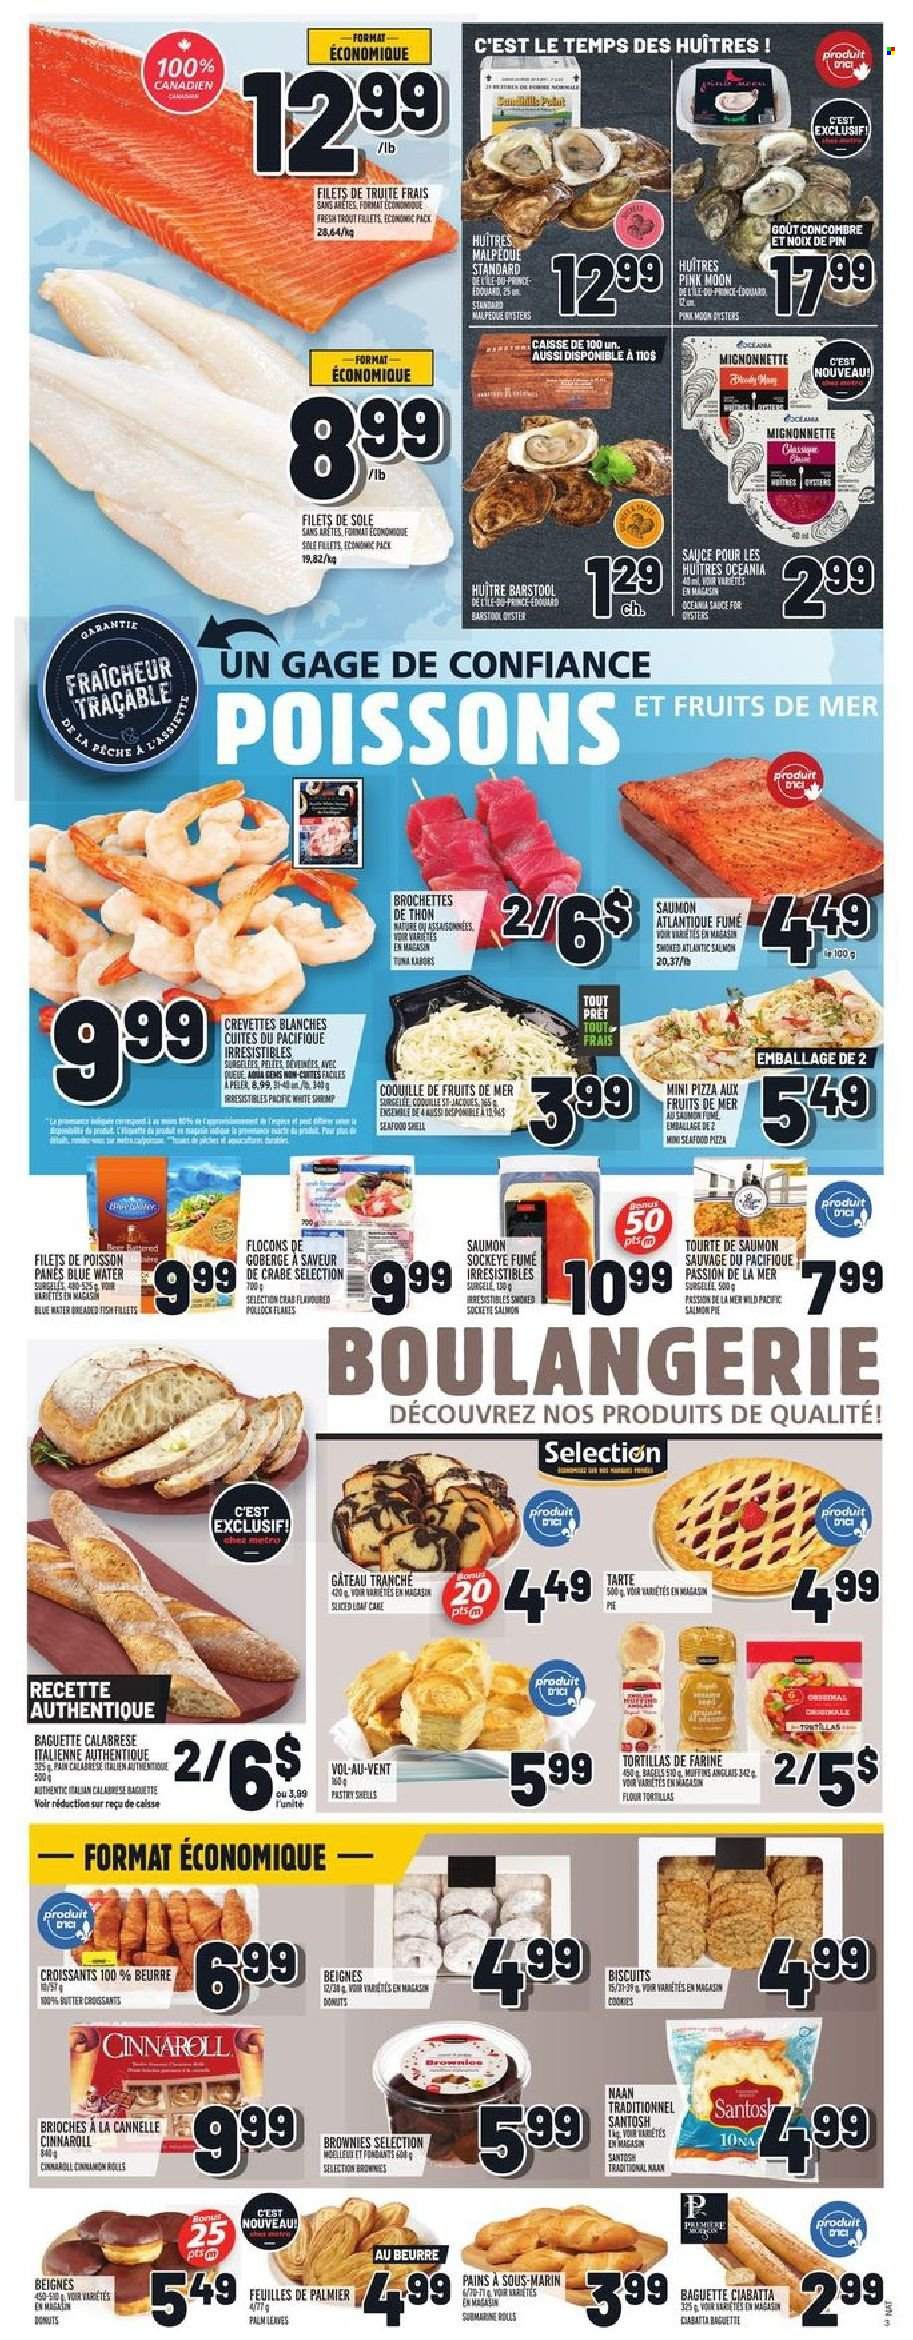 thumbnail - Metro Flyer - October 14, 2021 - October 20, 2021 - Sales products - bagels, baguette, tortillas, pie, croissant, flour tortillas, indian bread, brownies, donut, muffin, crepes, fish fillets, oysters, seafood, crab, fish, shrimps, pizza, cookies, biscuit, water, pin, aa batteries, ciabatta. Page 5.